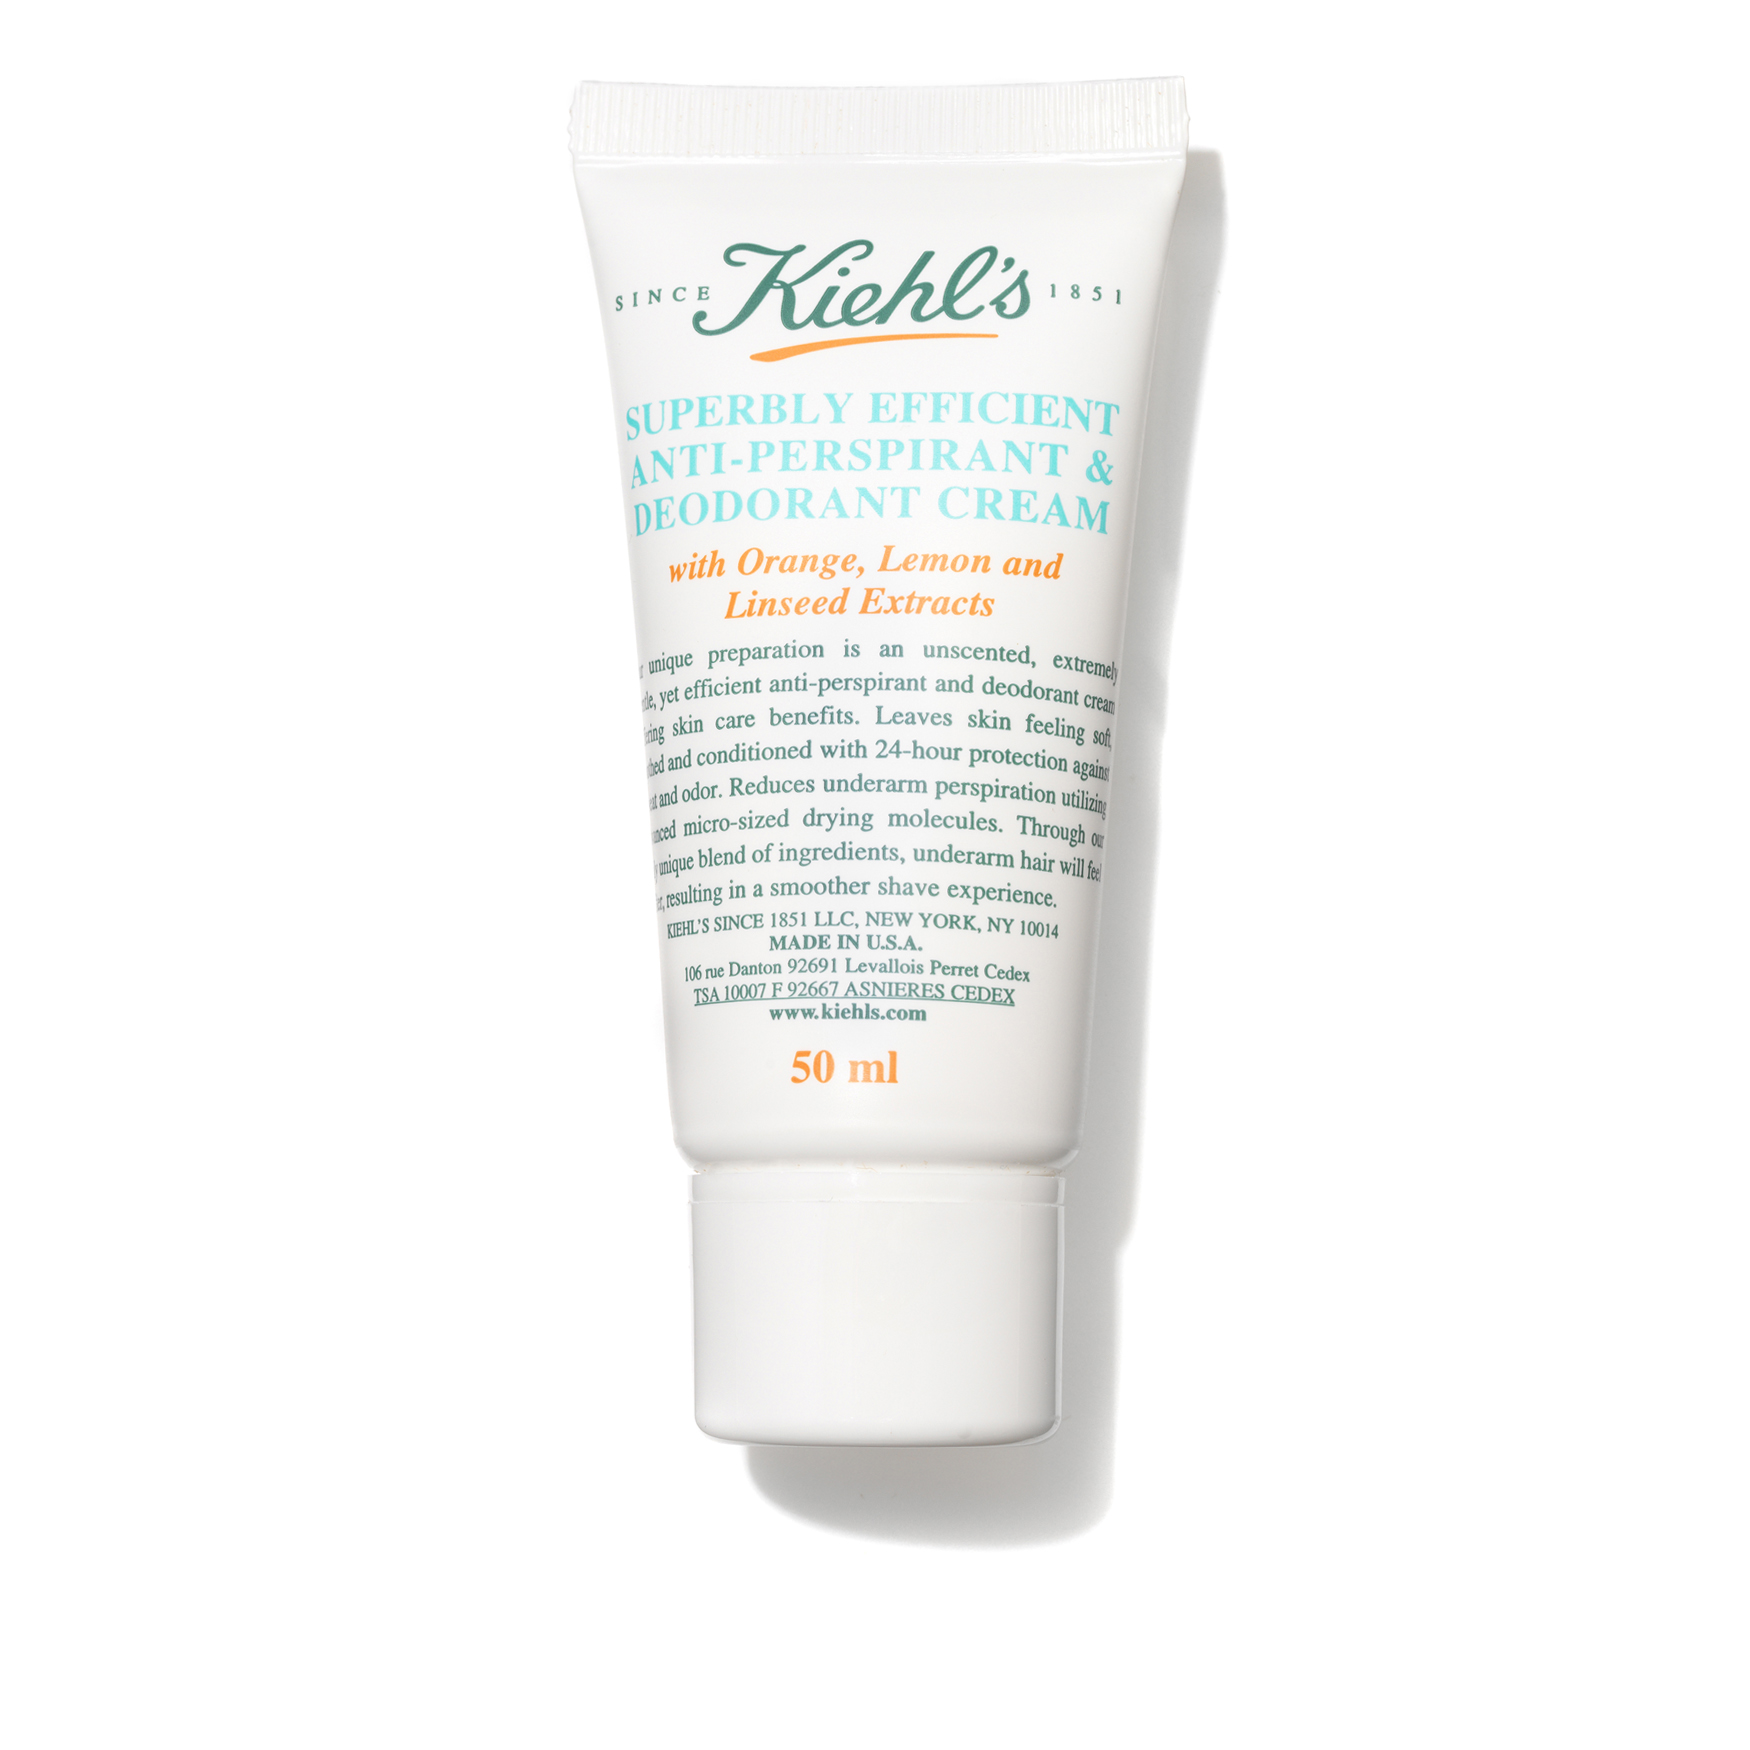 Kiehl's Superbly Efficient and Cream 1.7fl.oz Space NK